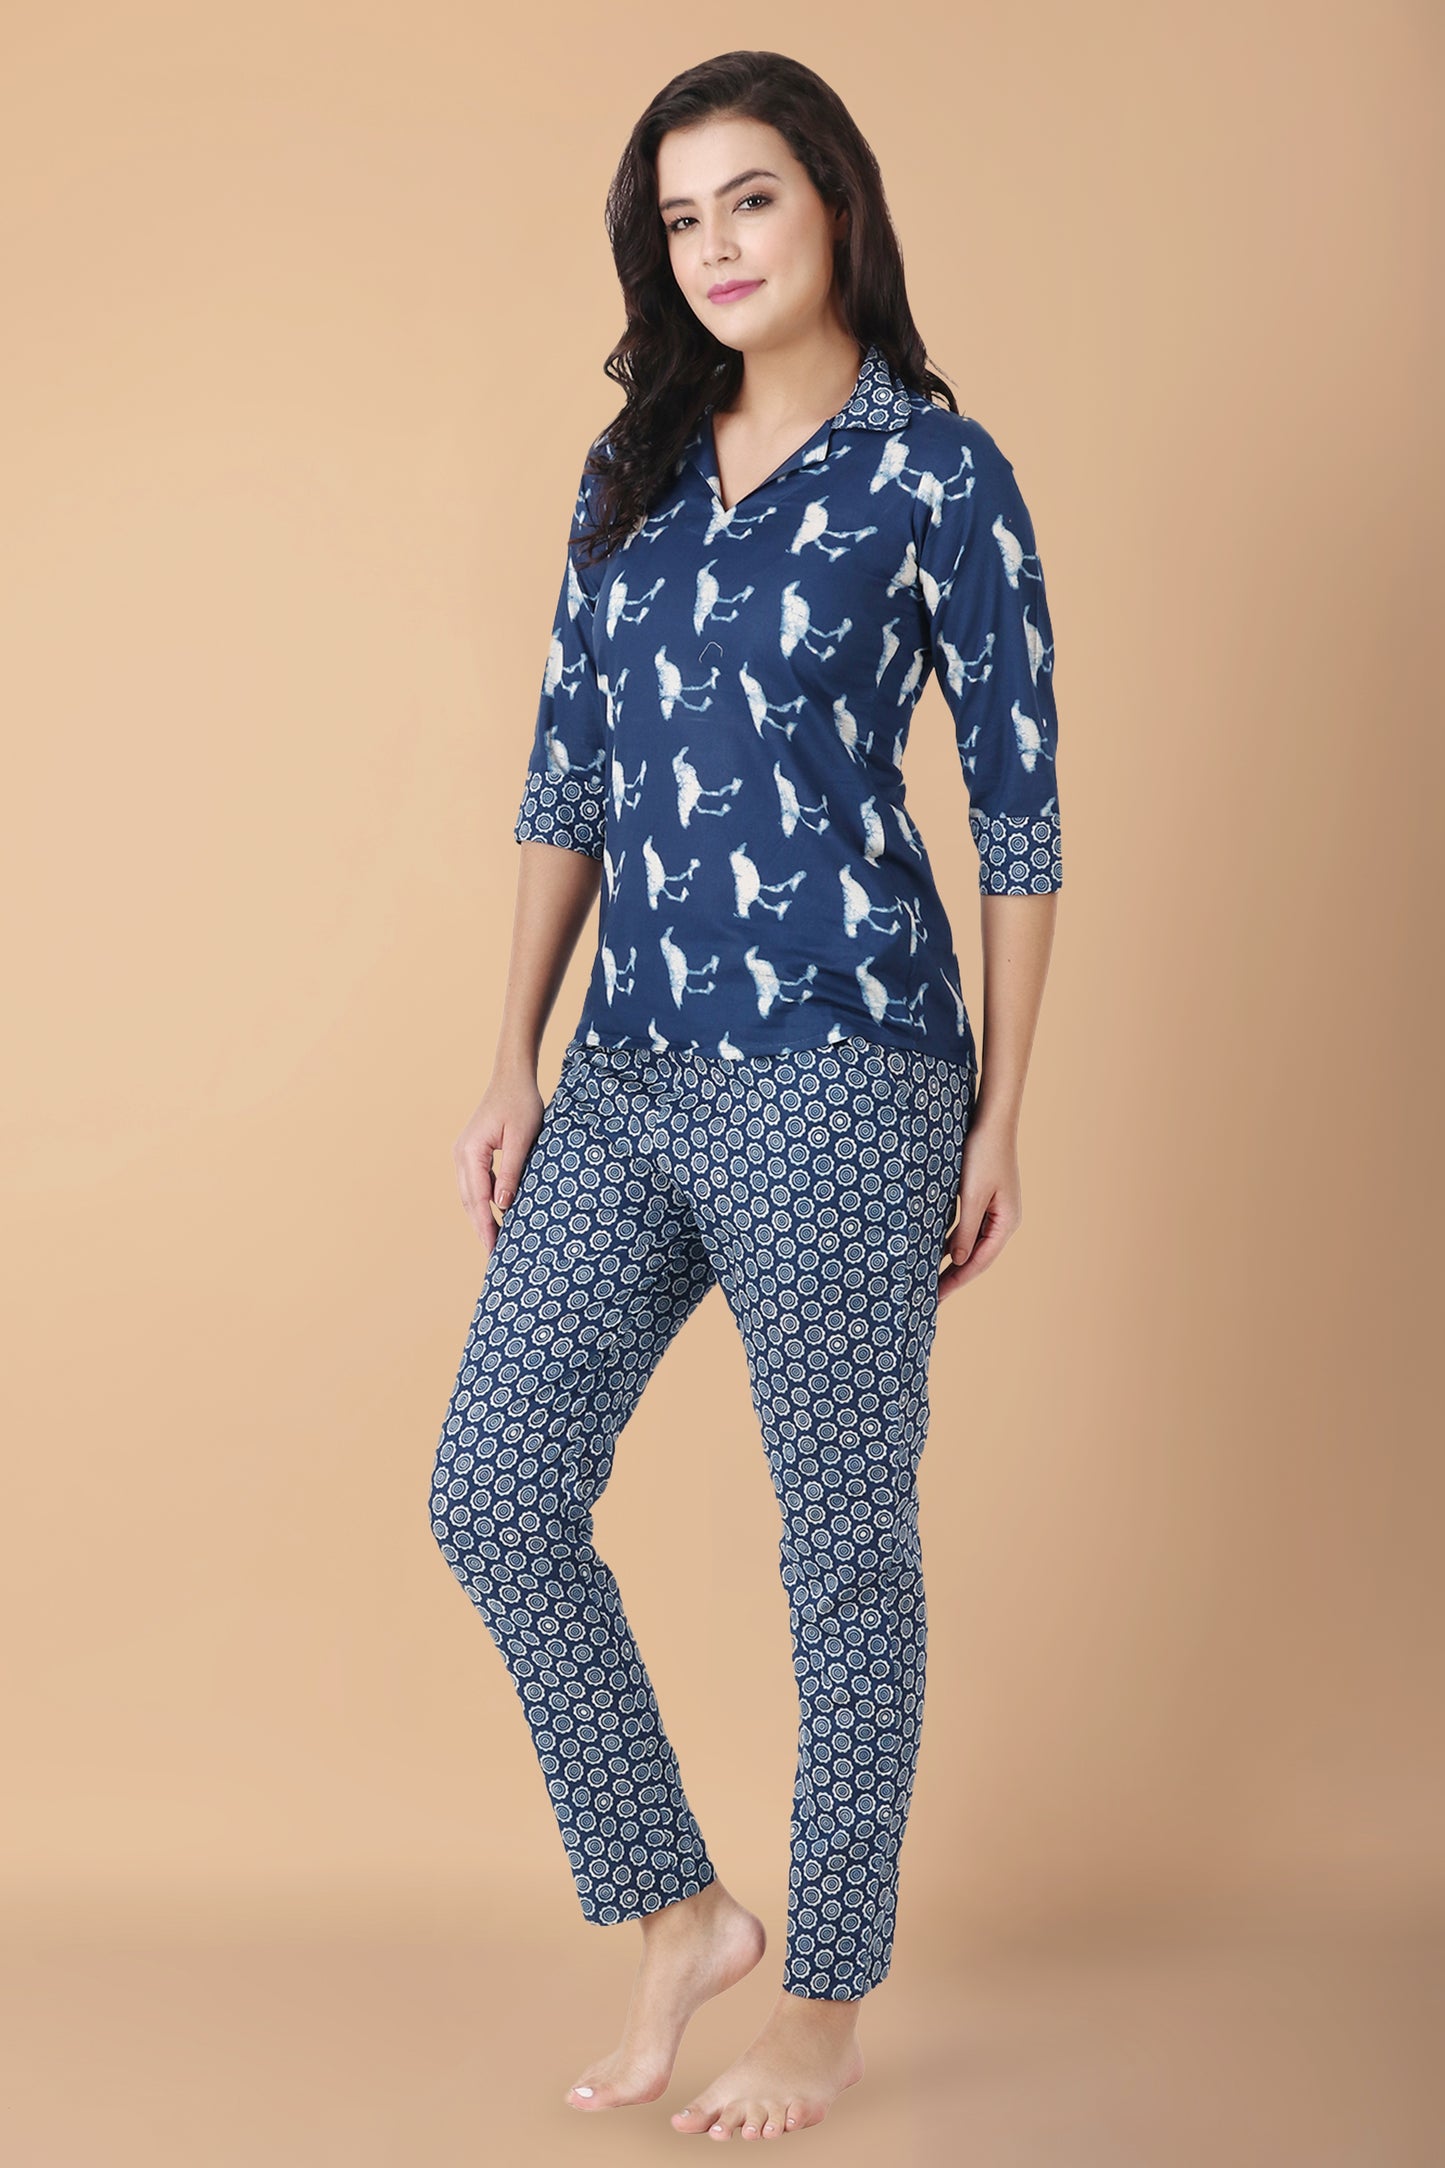 All Size, Collar Neck, Contrast Printed Elasticated Bottom, Cotton, Cotton Night Suit, Double Pockets, Dual Pockets, Flamingo Cotton Night Suit, Flamingo Print, Half Sleeves, Navy Blue, Night